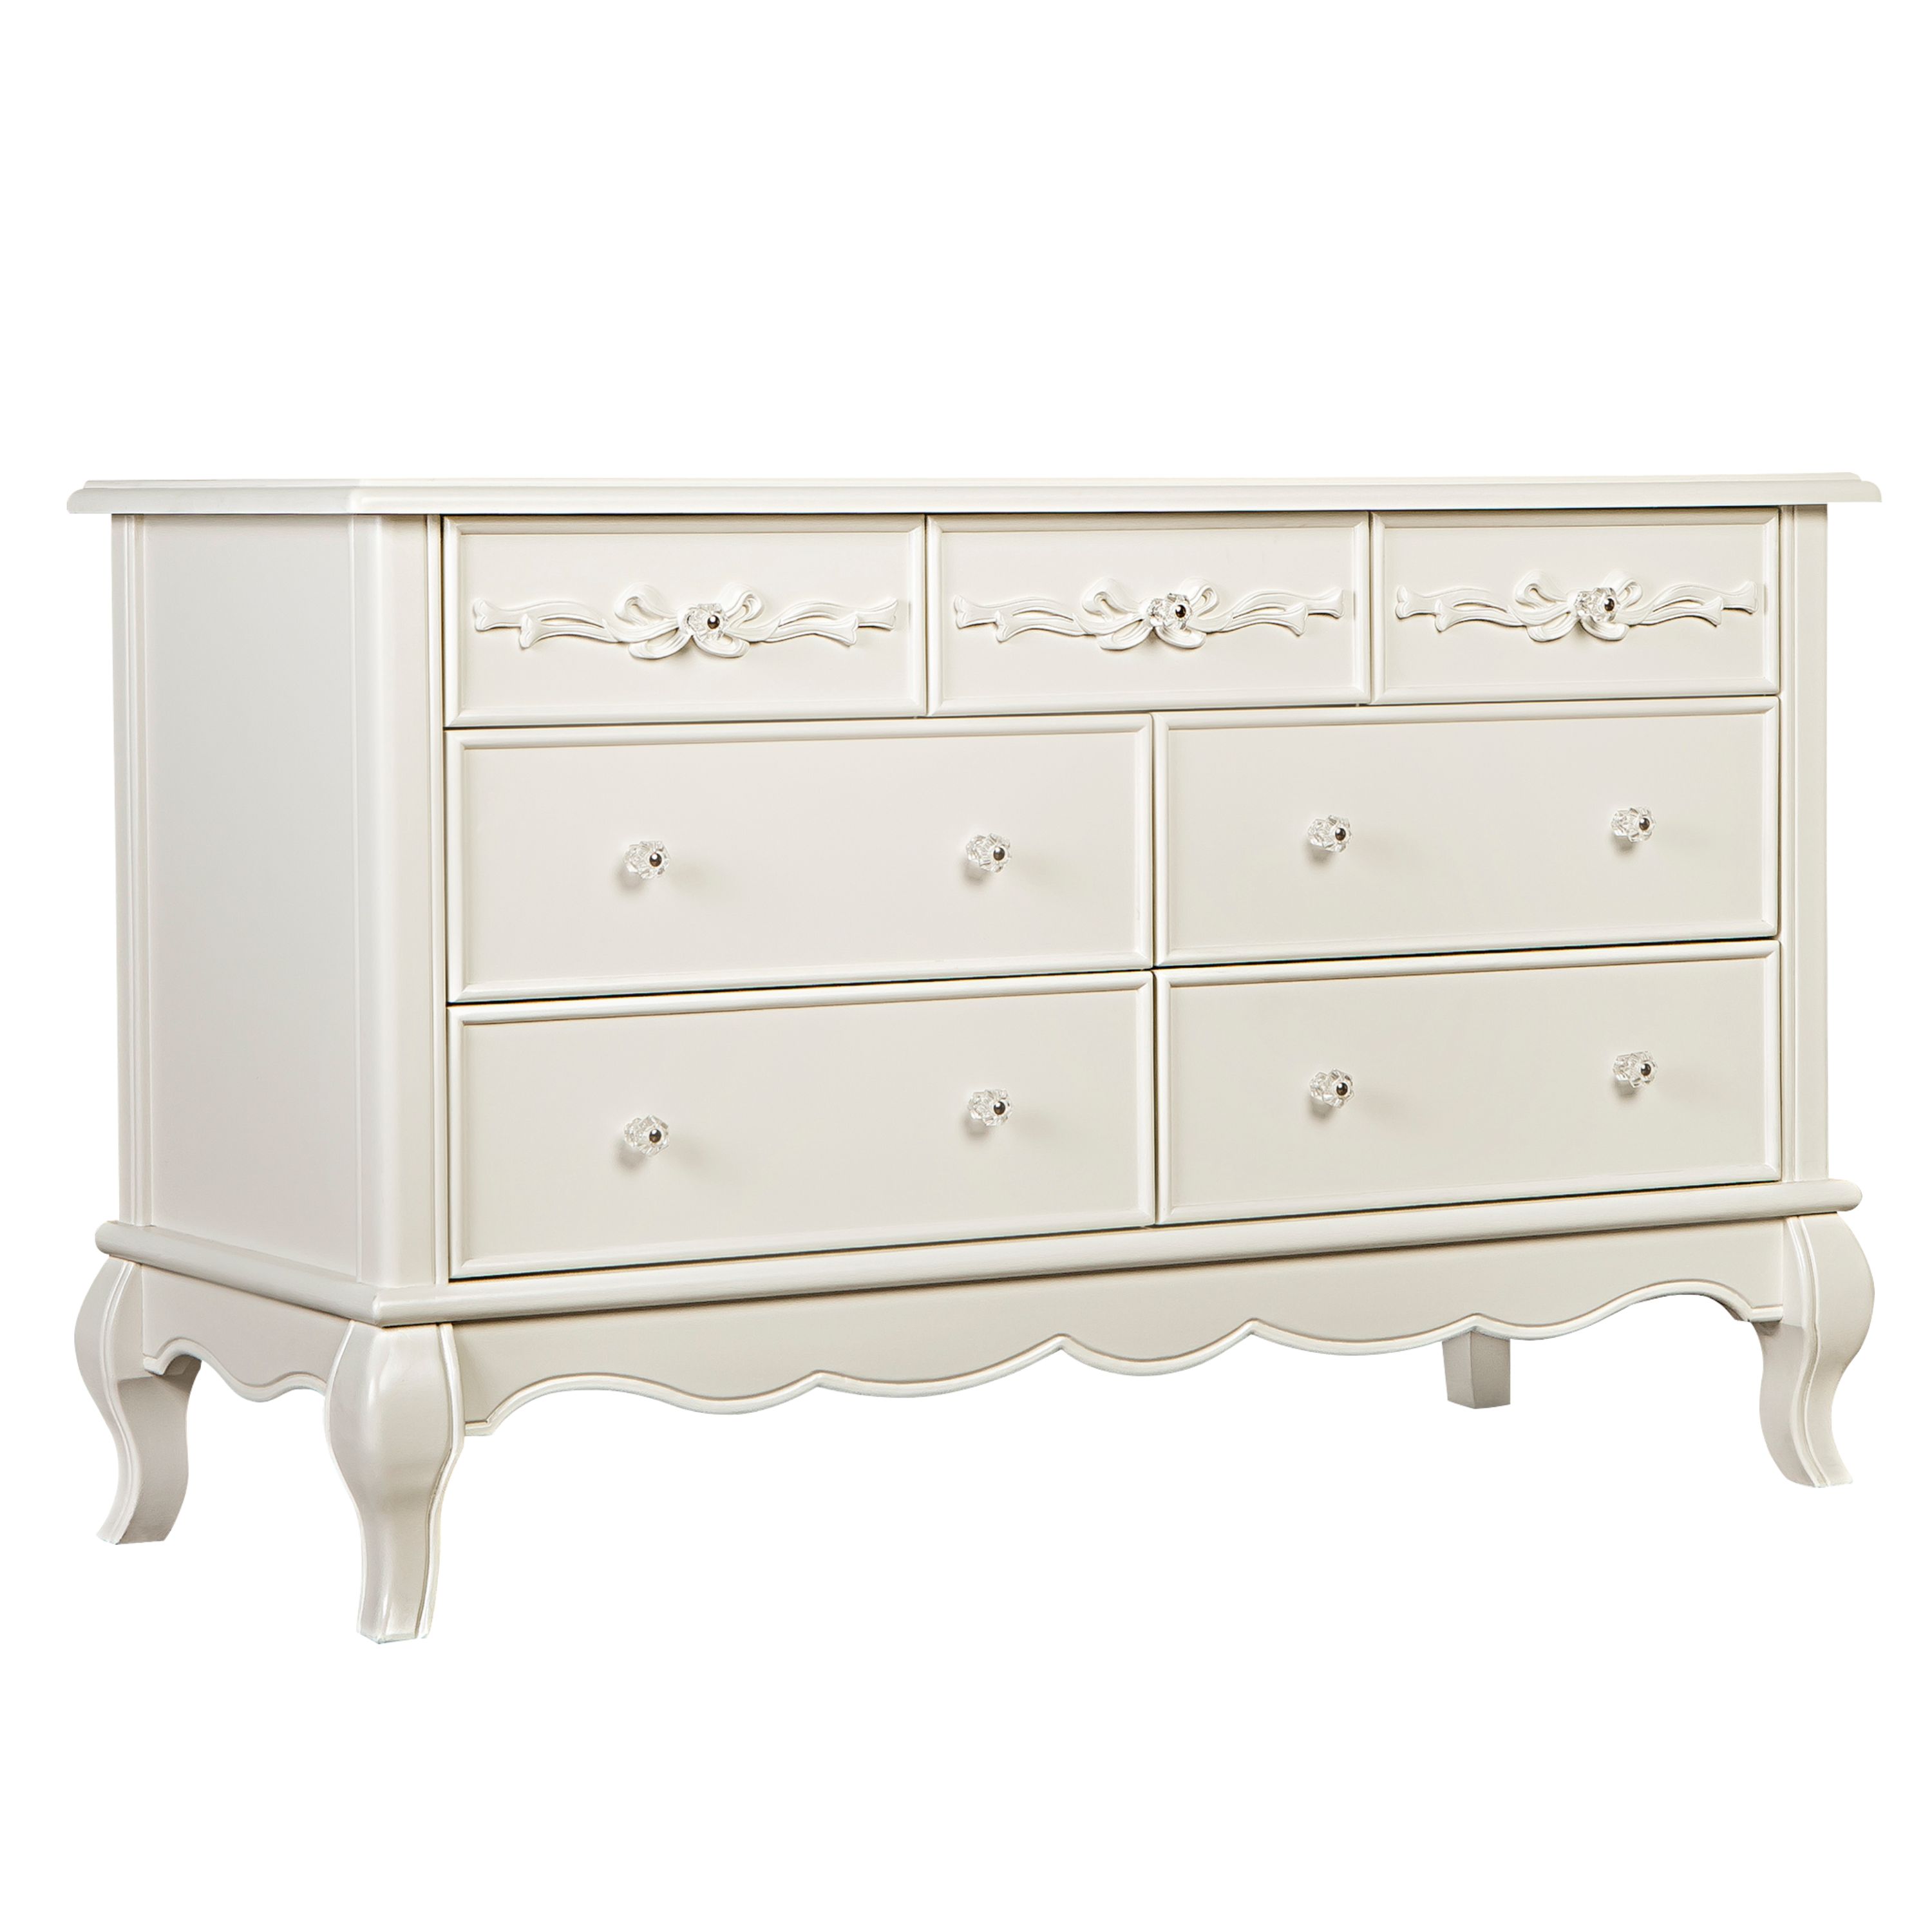 Evolur Aurora 7-Drawer Double Dresser, Ivory Lace, Spacious Drawers, classic - image 1 of 9